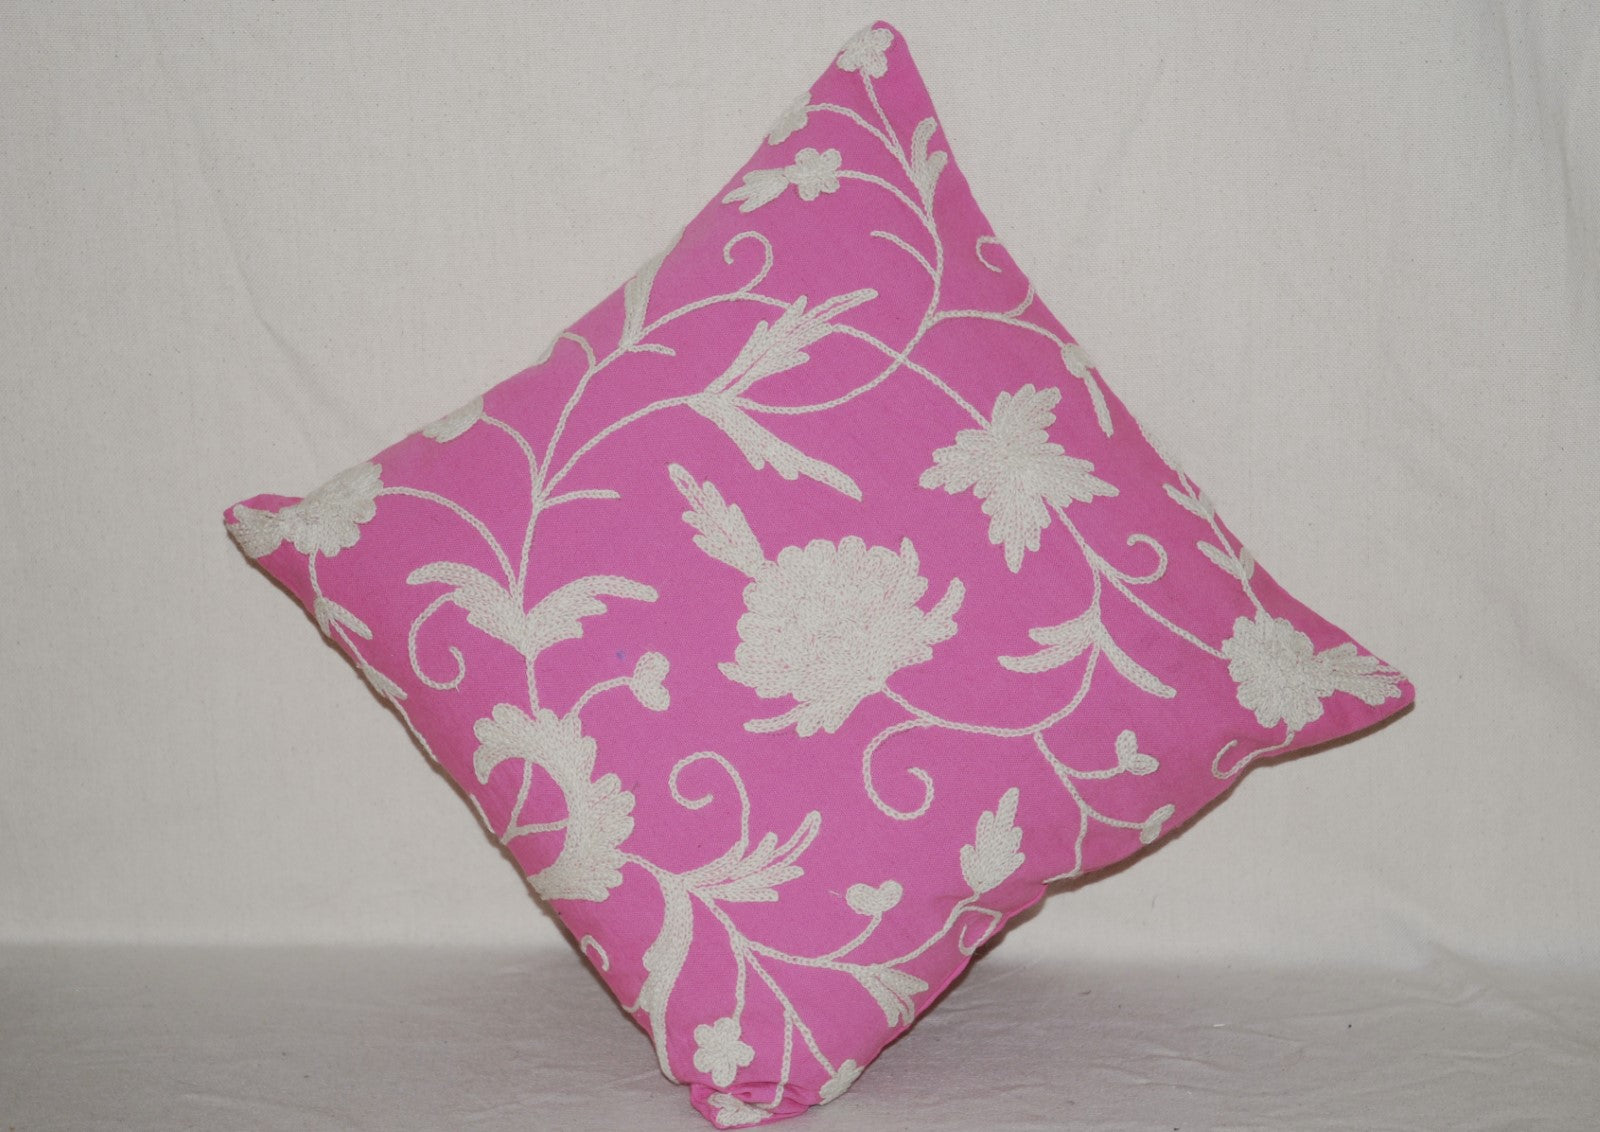 Crewel Embroidery Throw Pillowcase, Cushion Cover Floral, White on Pink #CW311